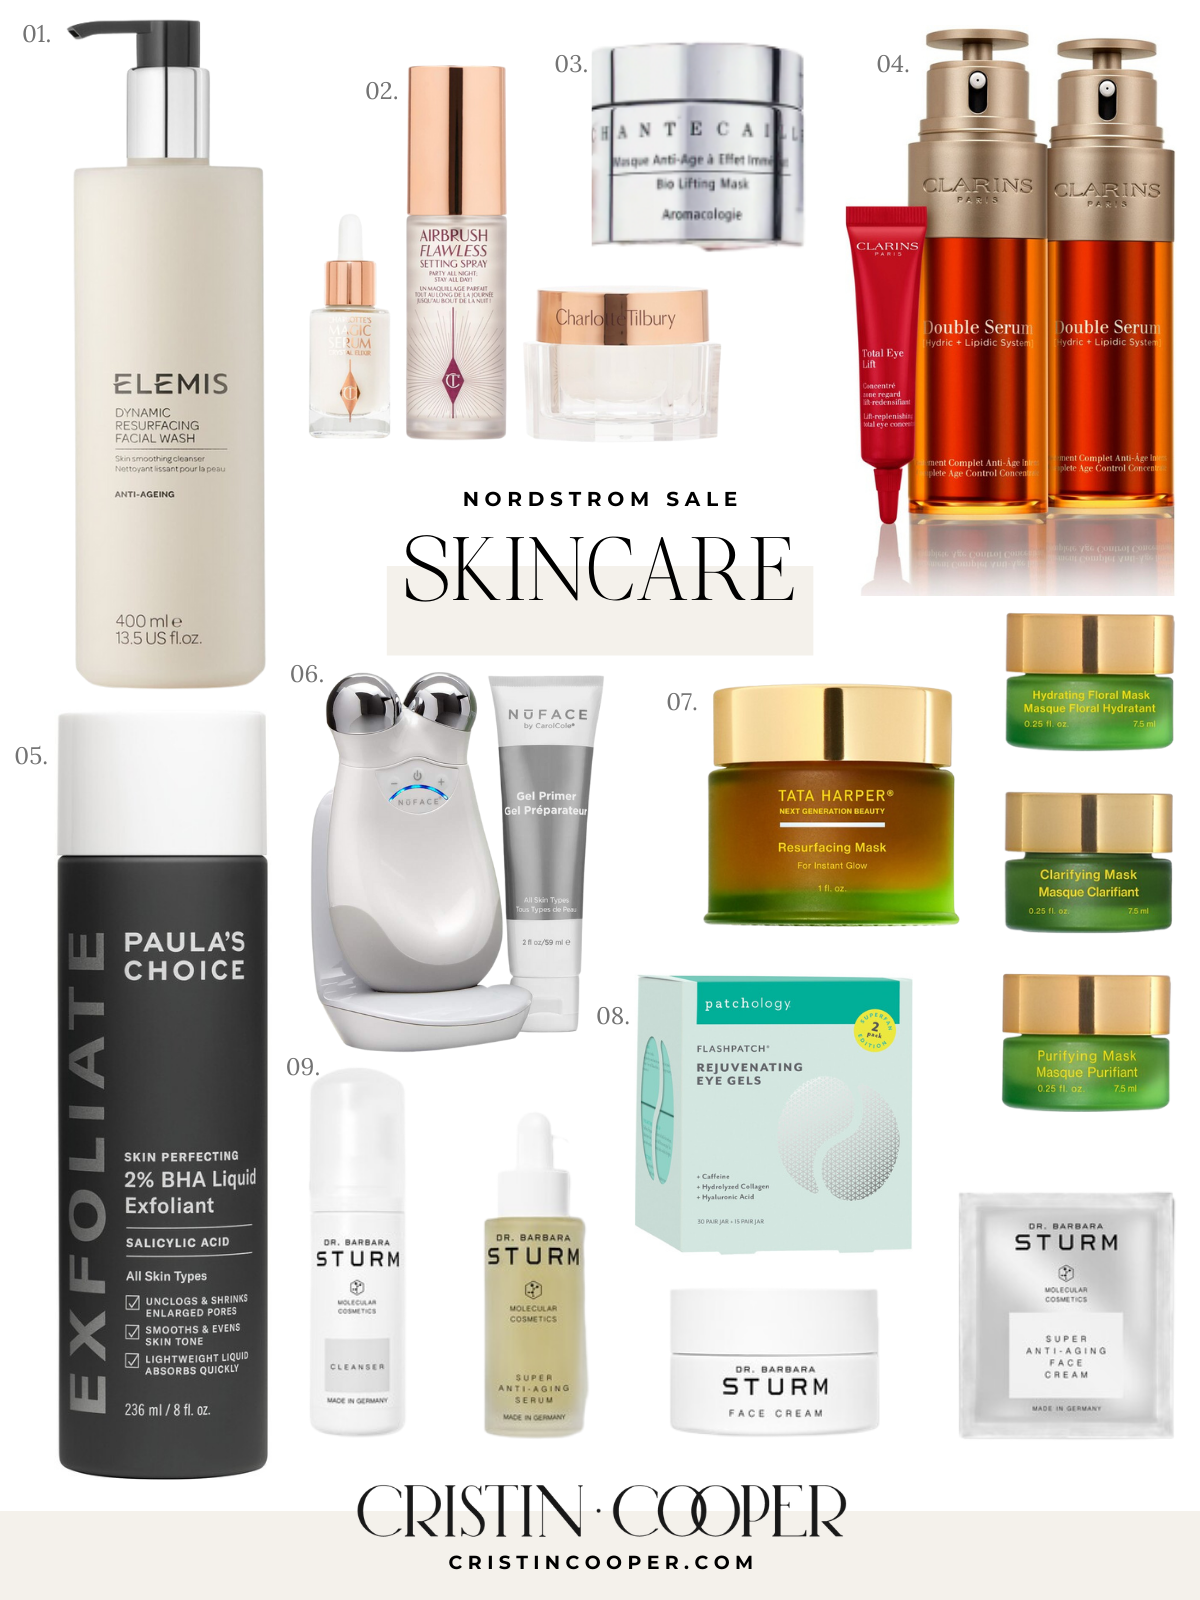 Skincare picks from the Nordstrom sale.